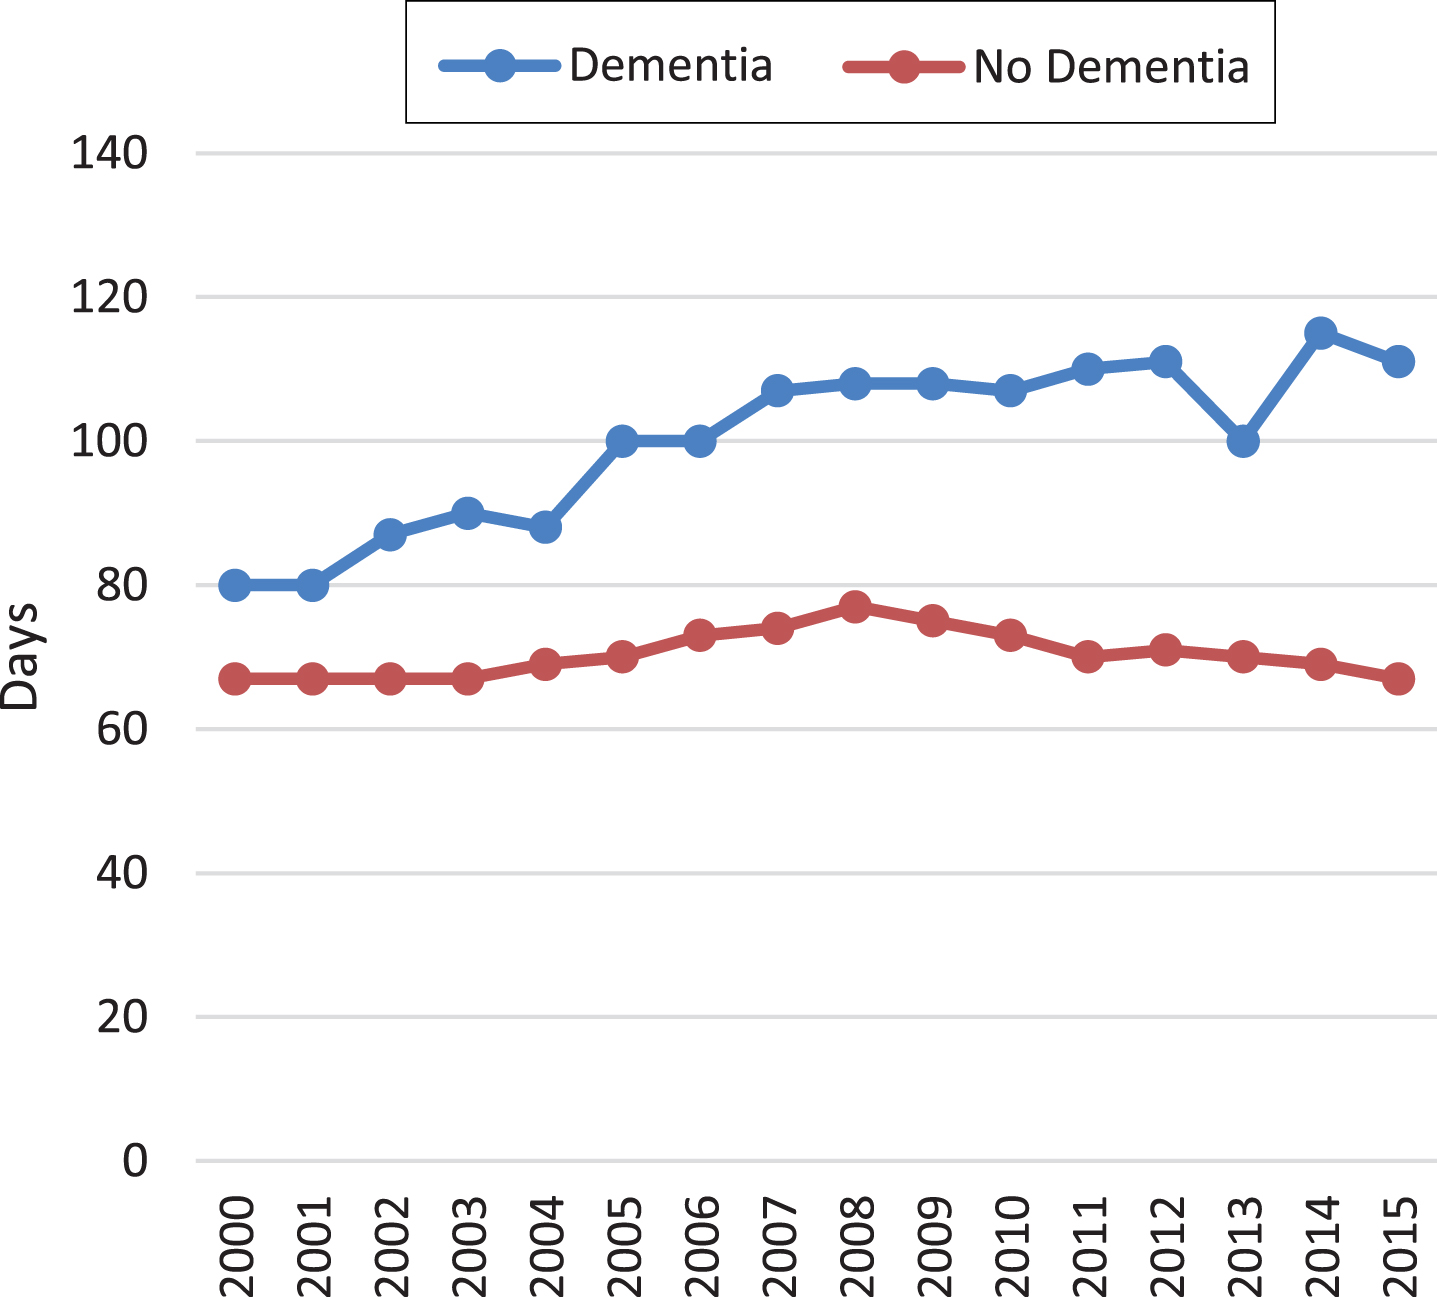 Opioid treatment intensity. The figure shows the median number of days treated with 30 mg of oral morphine per day in elderly with and without dementia from 2000 to 2015.